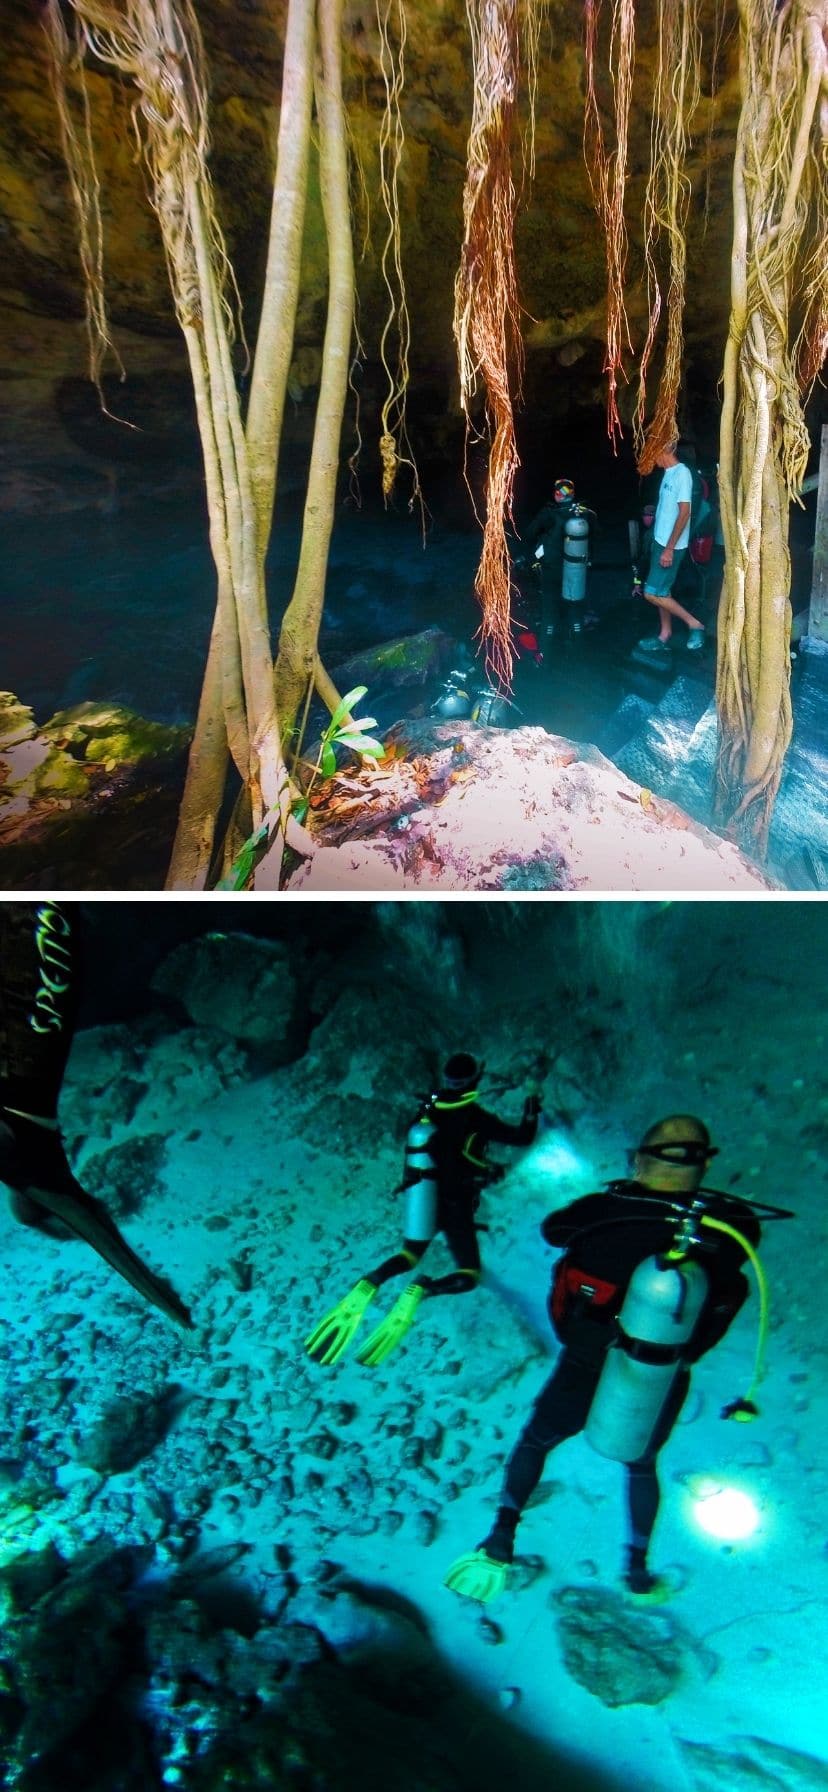 The Cenotes near Cancun are amazing and really easy to add to a beach vacation. Cenotes are even easy to visit as a cruise excursion from a Caribbean Mexico port of call or Yucatan road trip.